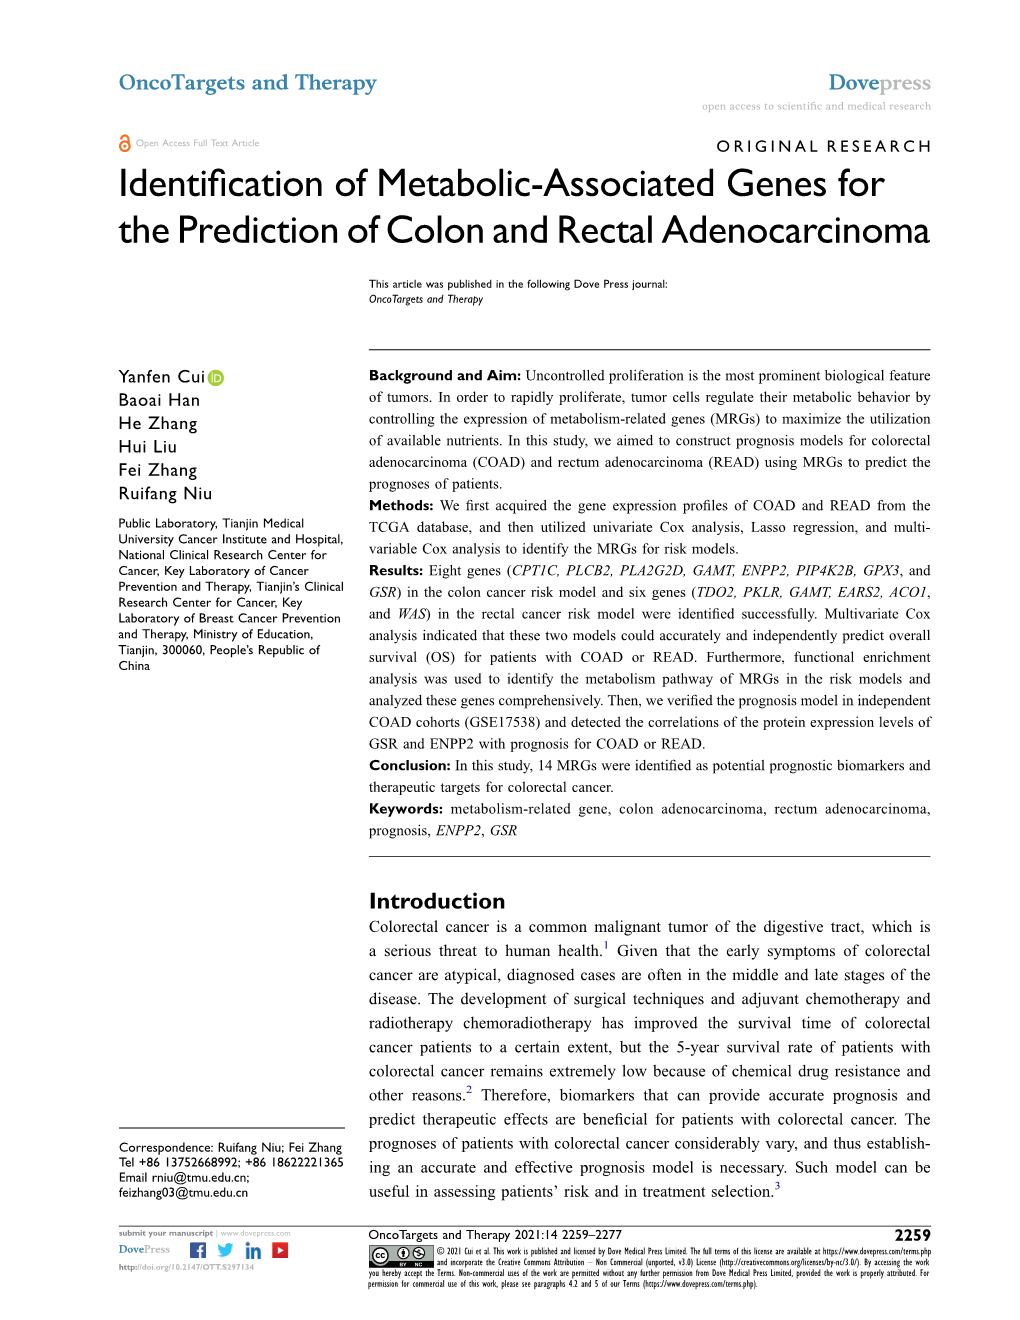 Identification of Metabolic-Associated Genes for the Prediction of Colon and Rectal Adenocarcinoma